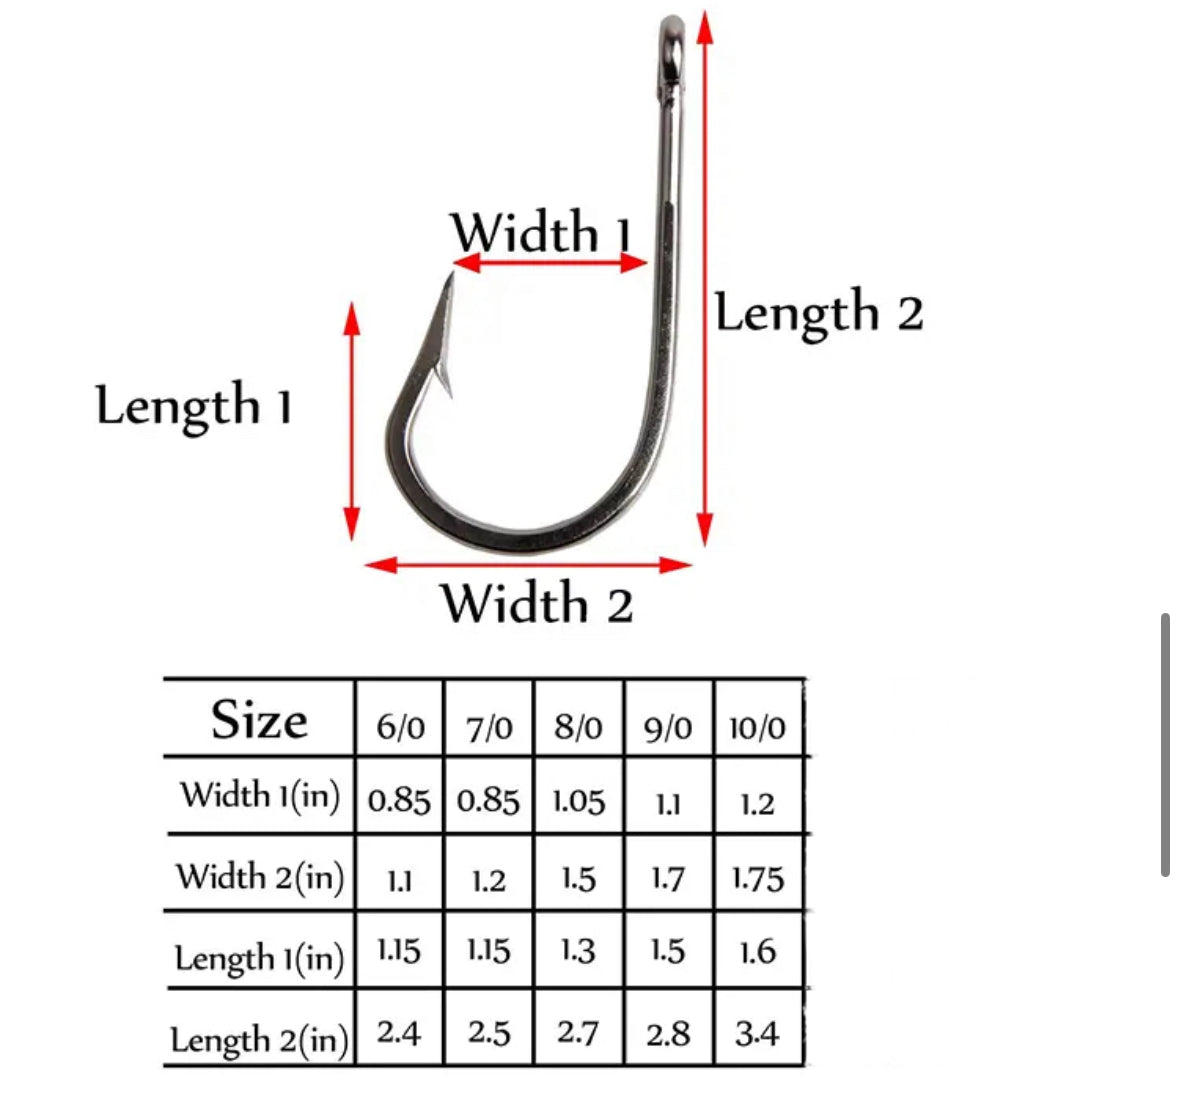 7691S Style Stainless Steel Hook Big Game Southern Tuna Hooks